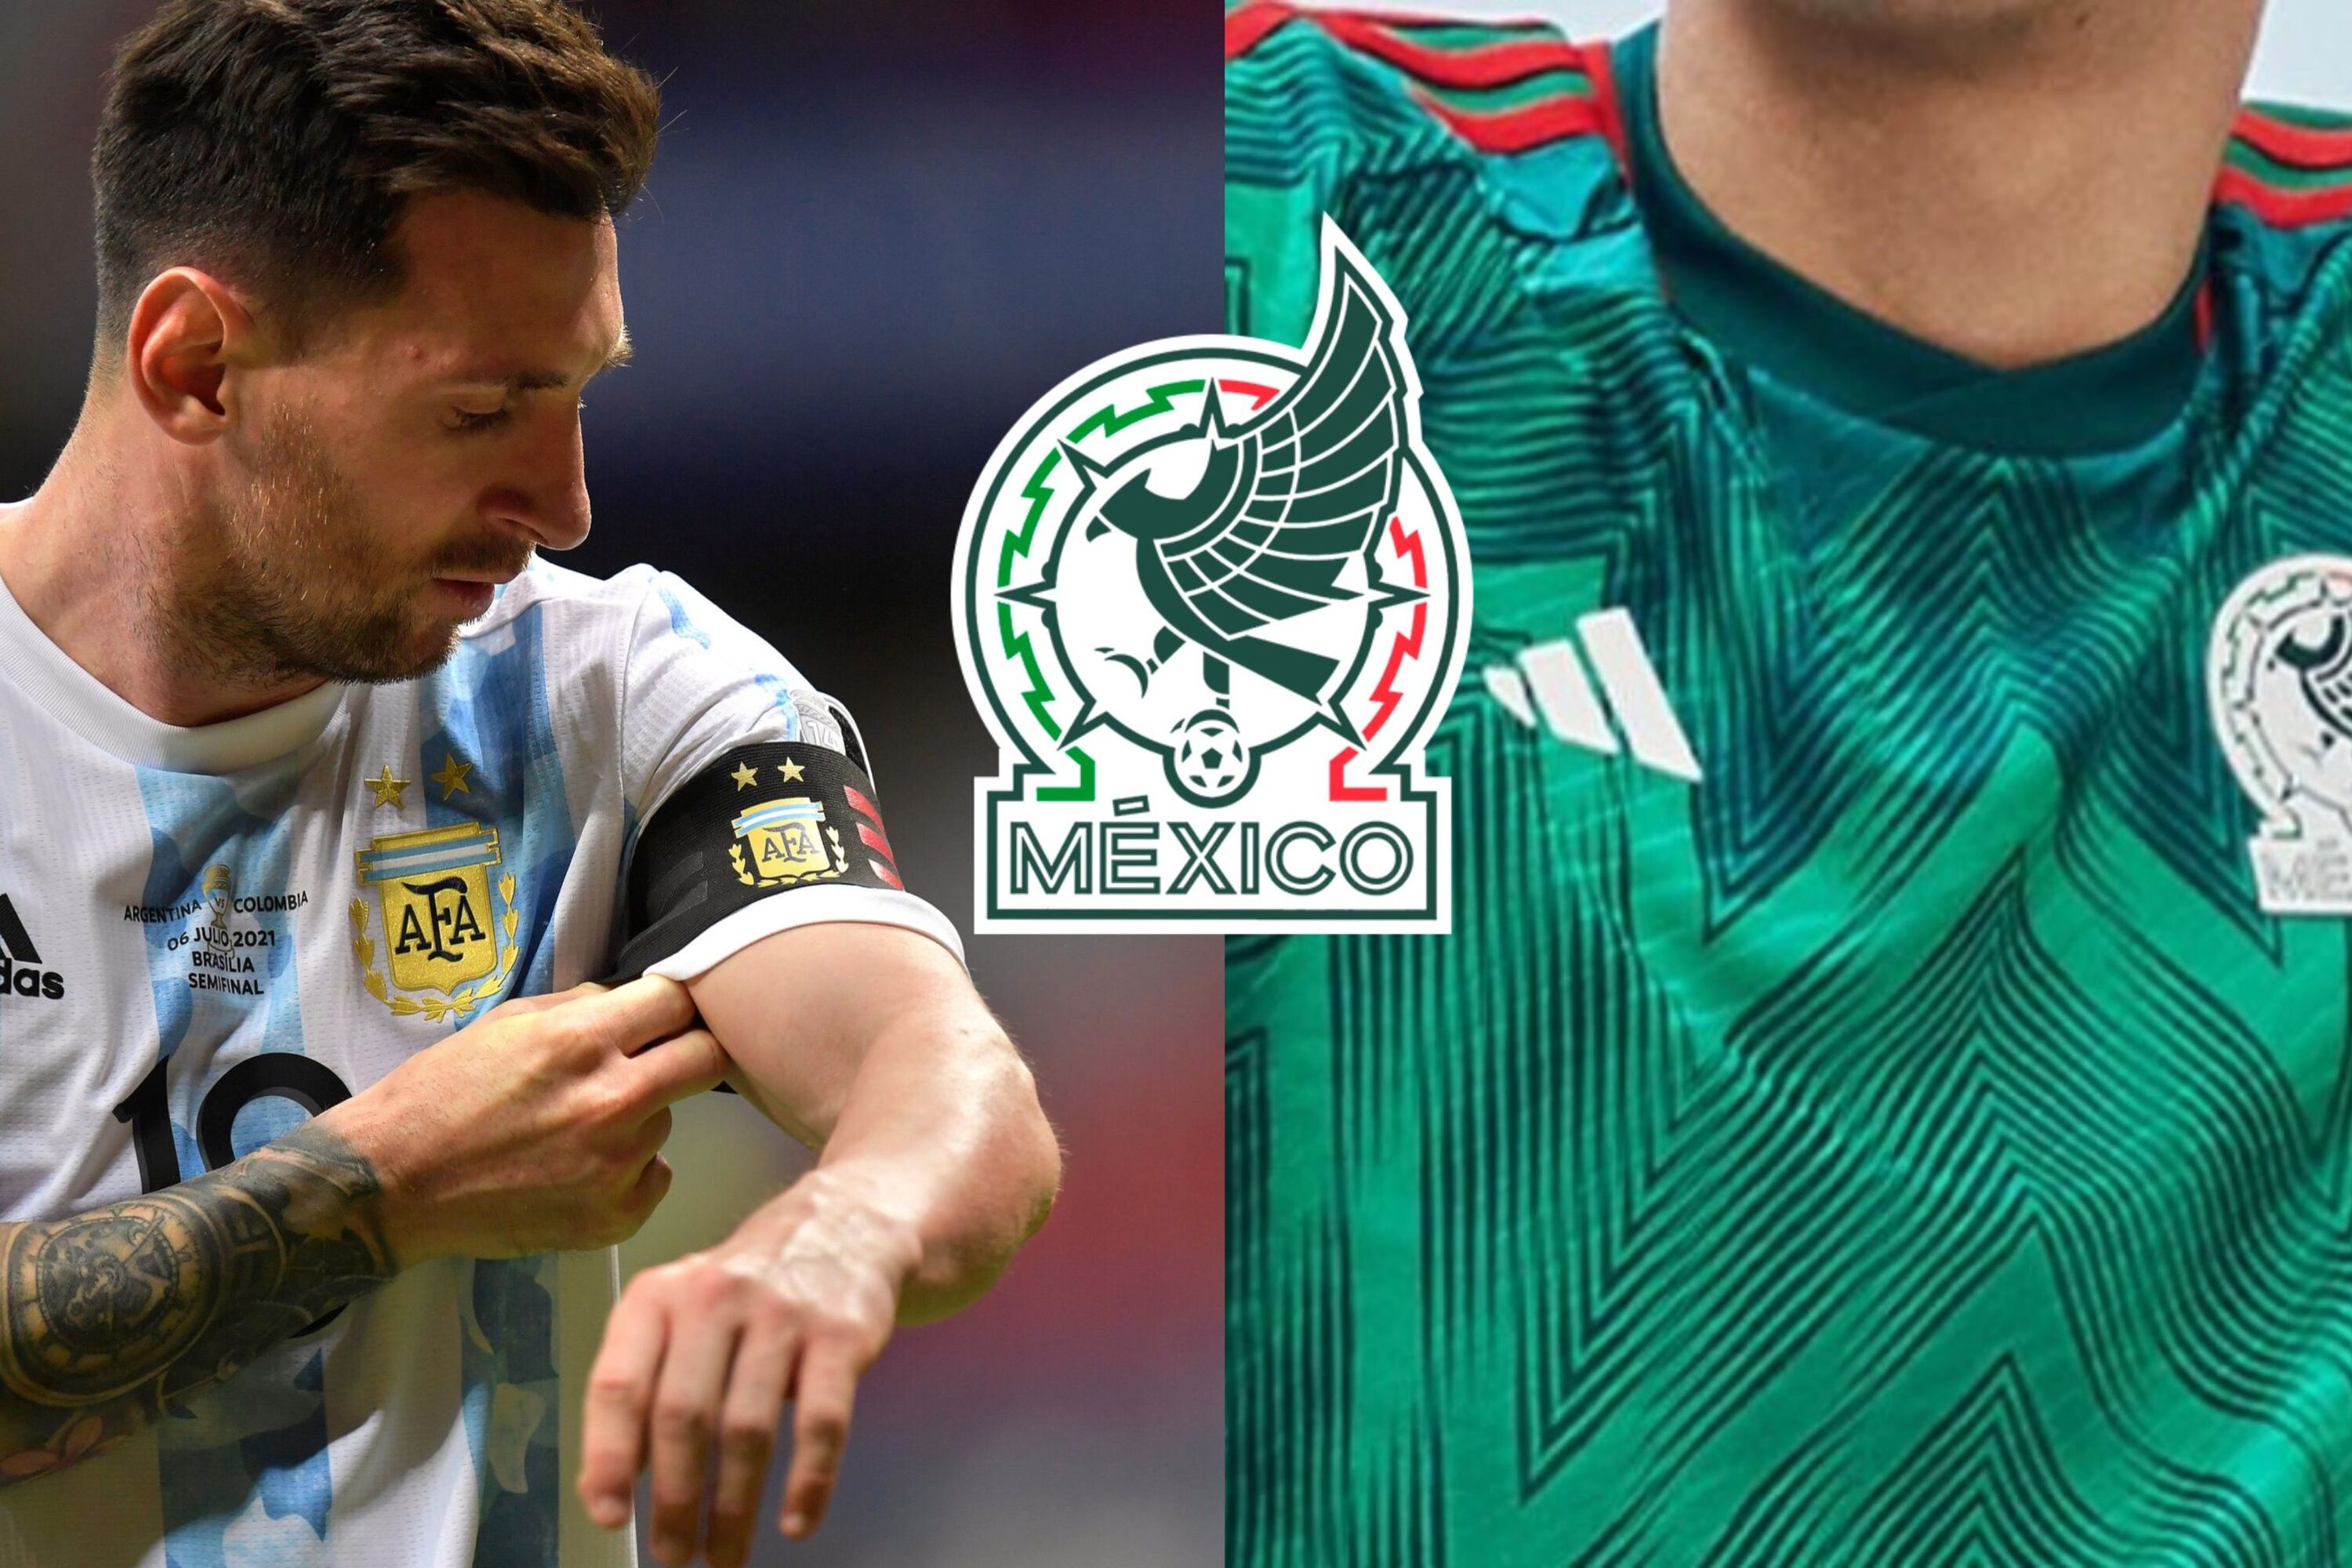 Two months before the World Cup, the Mexican who decided to play for Argentina instead of El Tri